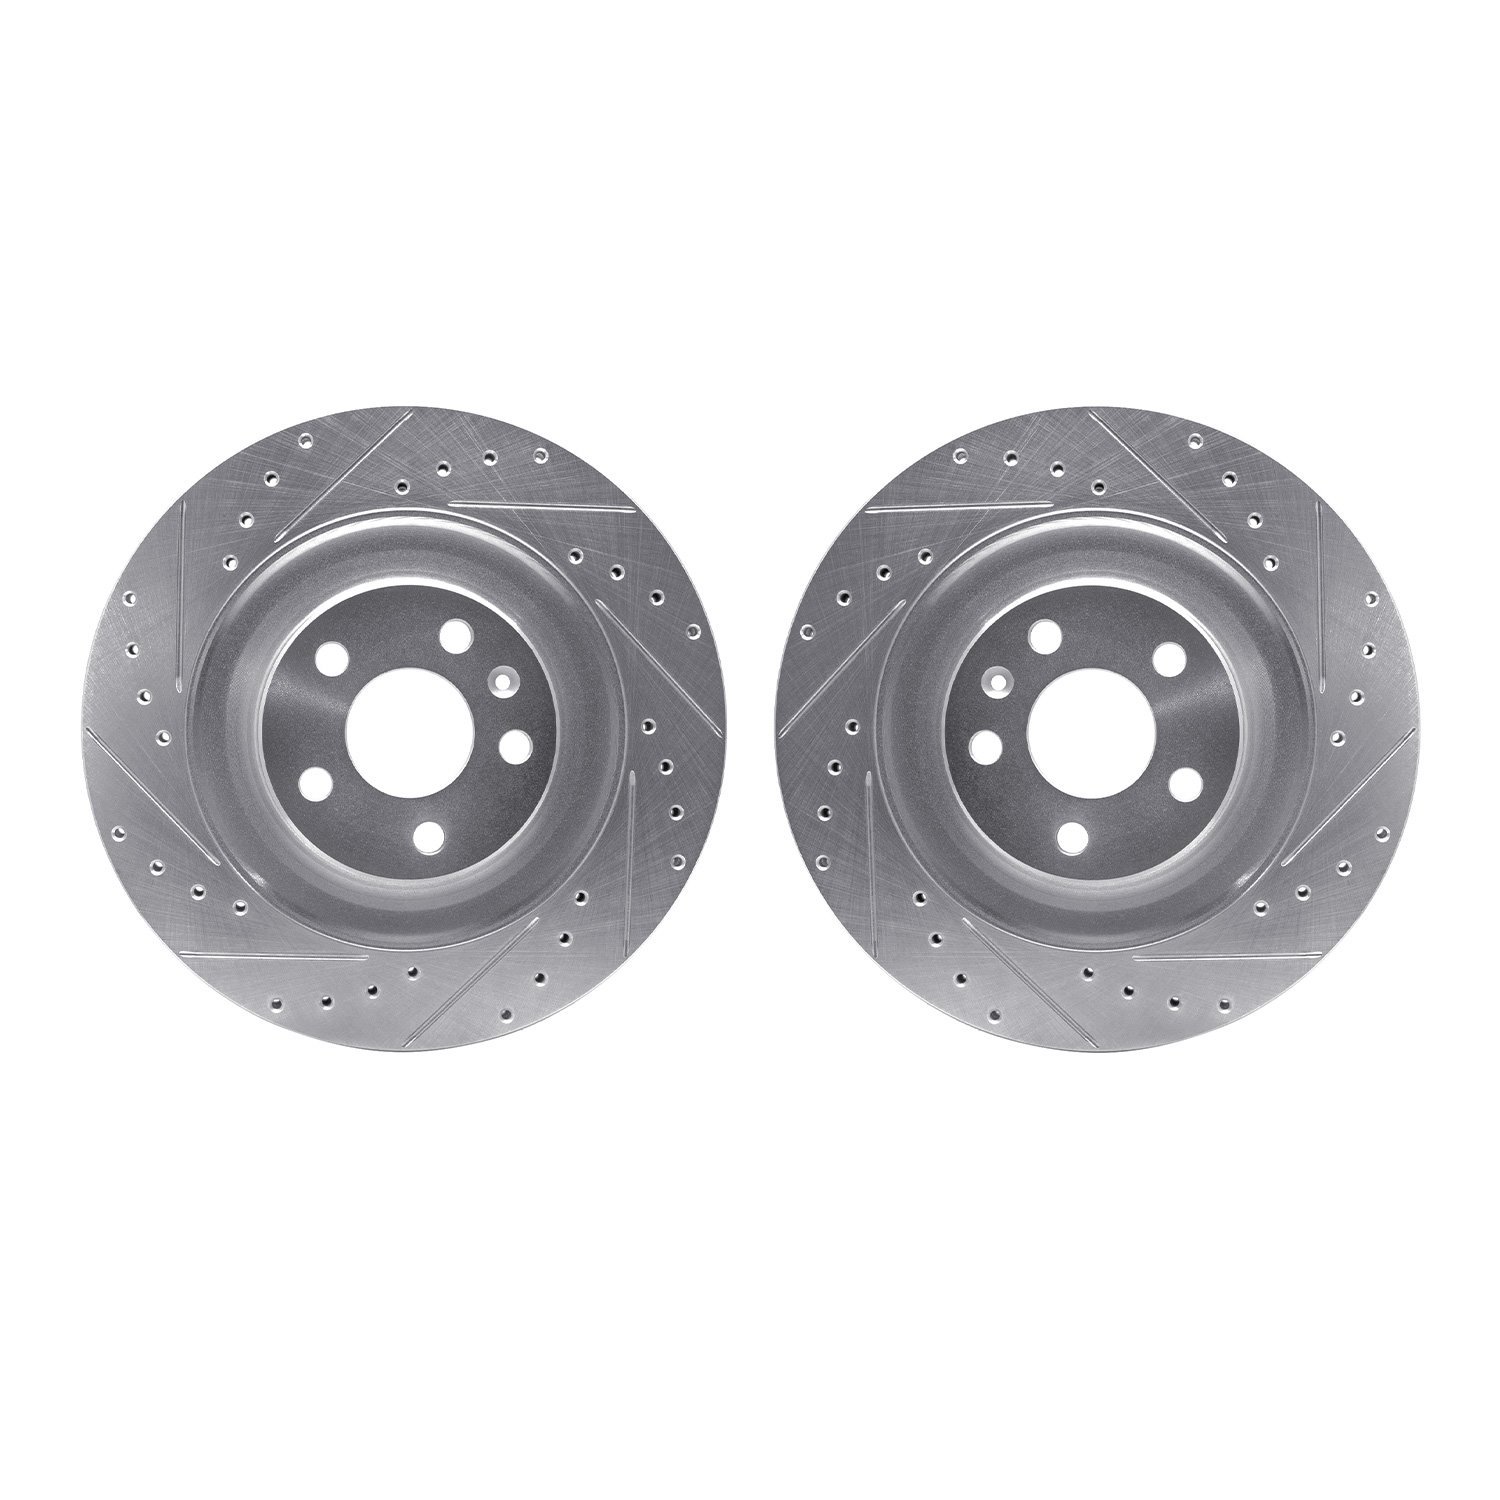 7002-27054 Drilled/Slotted Brake Rotors [Silver], Fits Select Multiple Makes/Models, Position: Rear